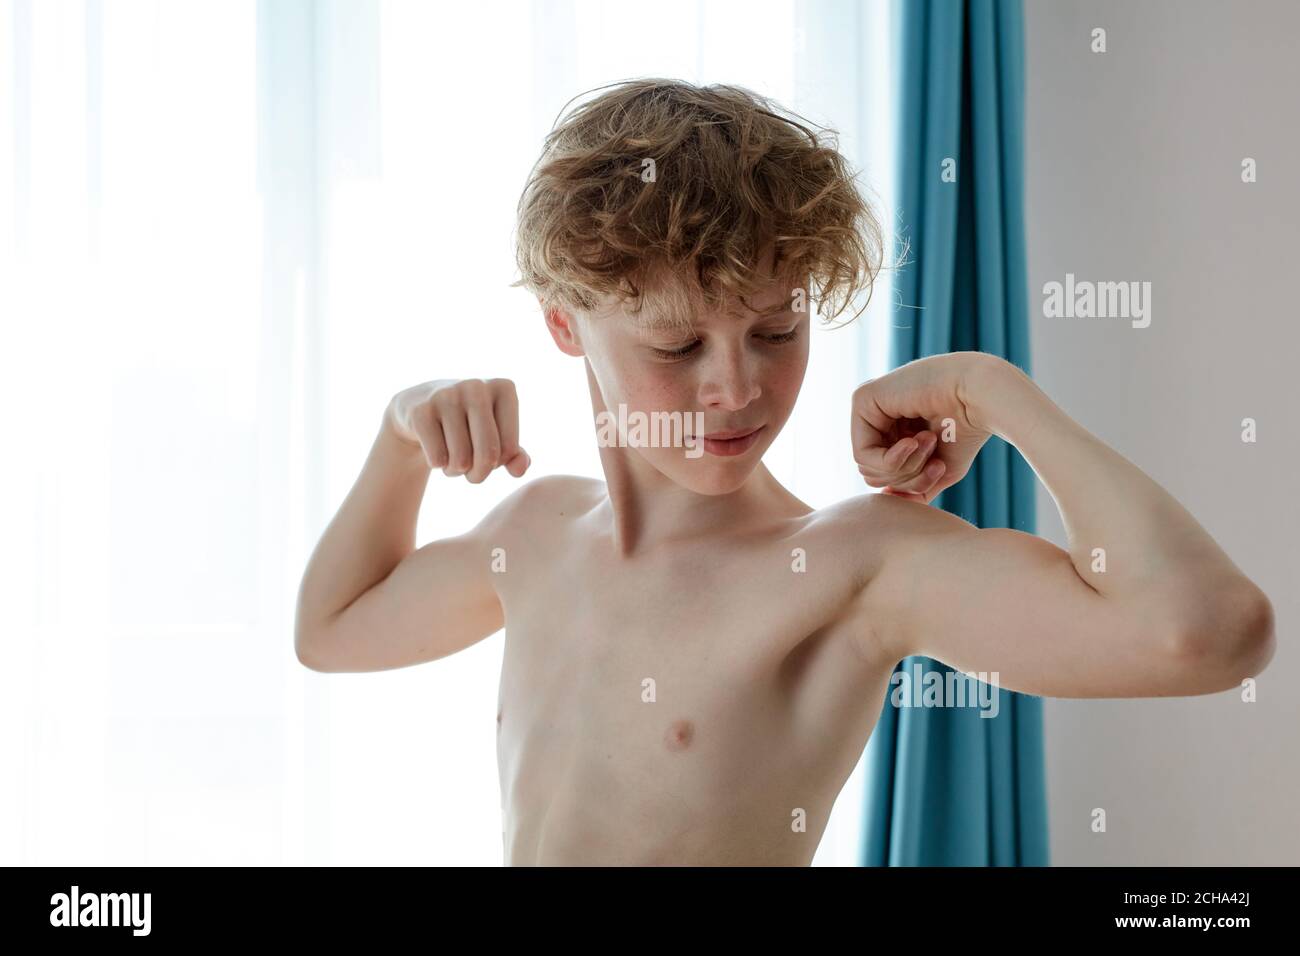 young caucasian teenager boy showing arms muscles, proud. fitness concept. at home Stock Photo